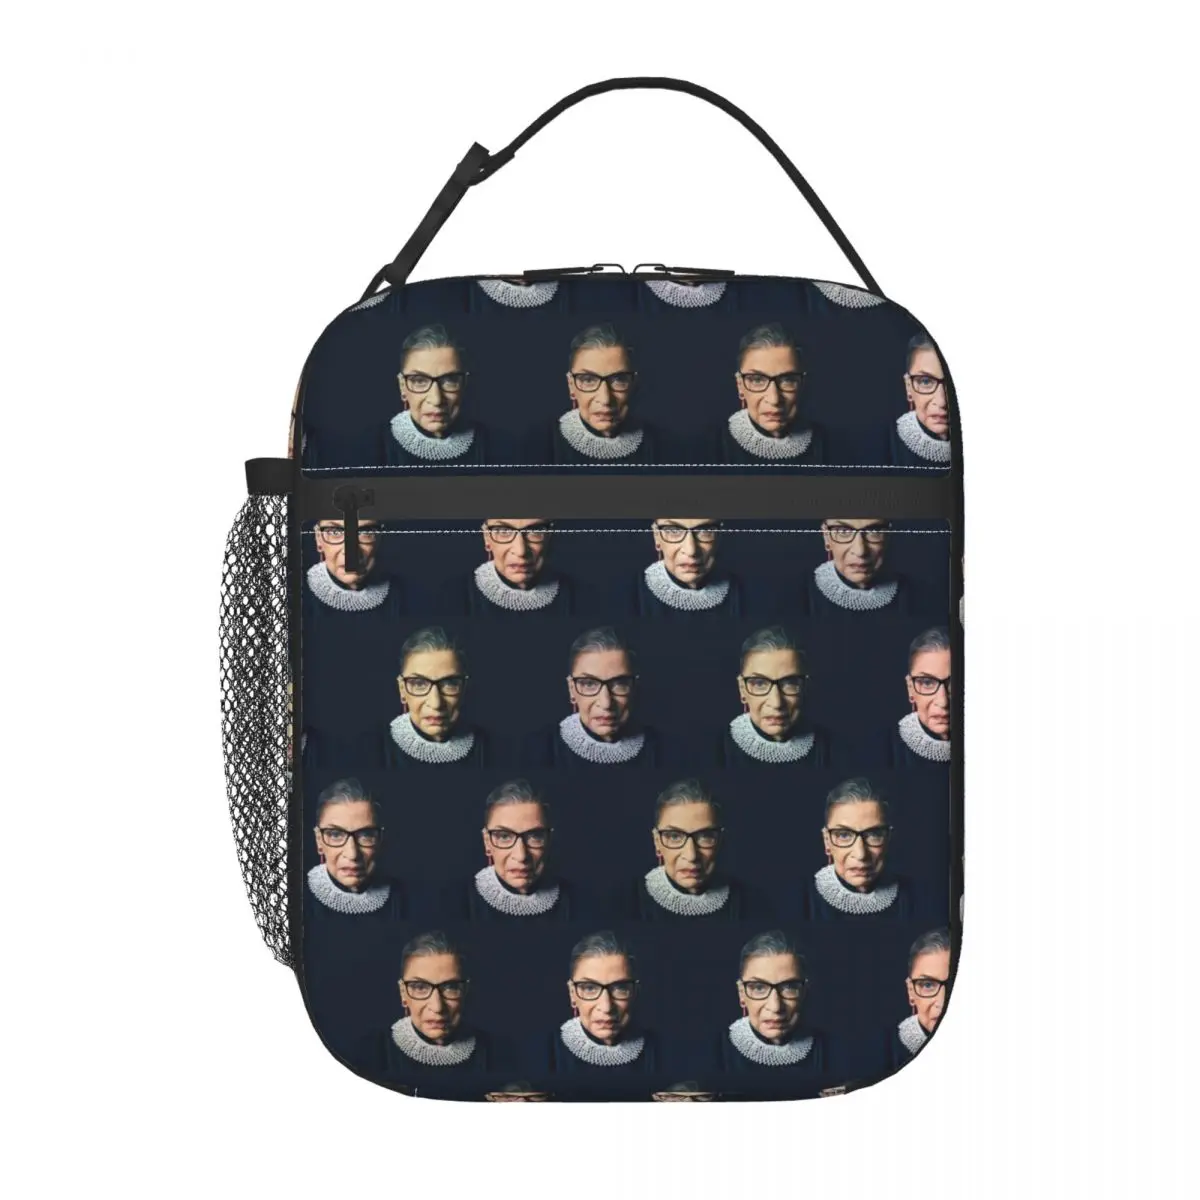 

Womens Rights Lunch Bag with Handle Ruth Bader Ginsburg Meal Mesh Pocket Cooler Bag Hot Reusable Clutch Takeaway Thermal Bag